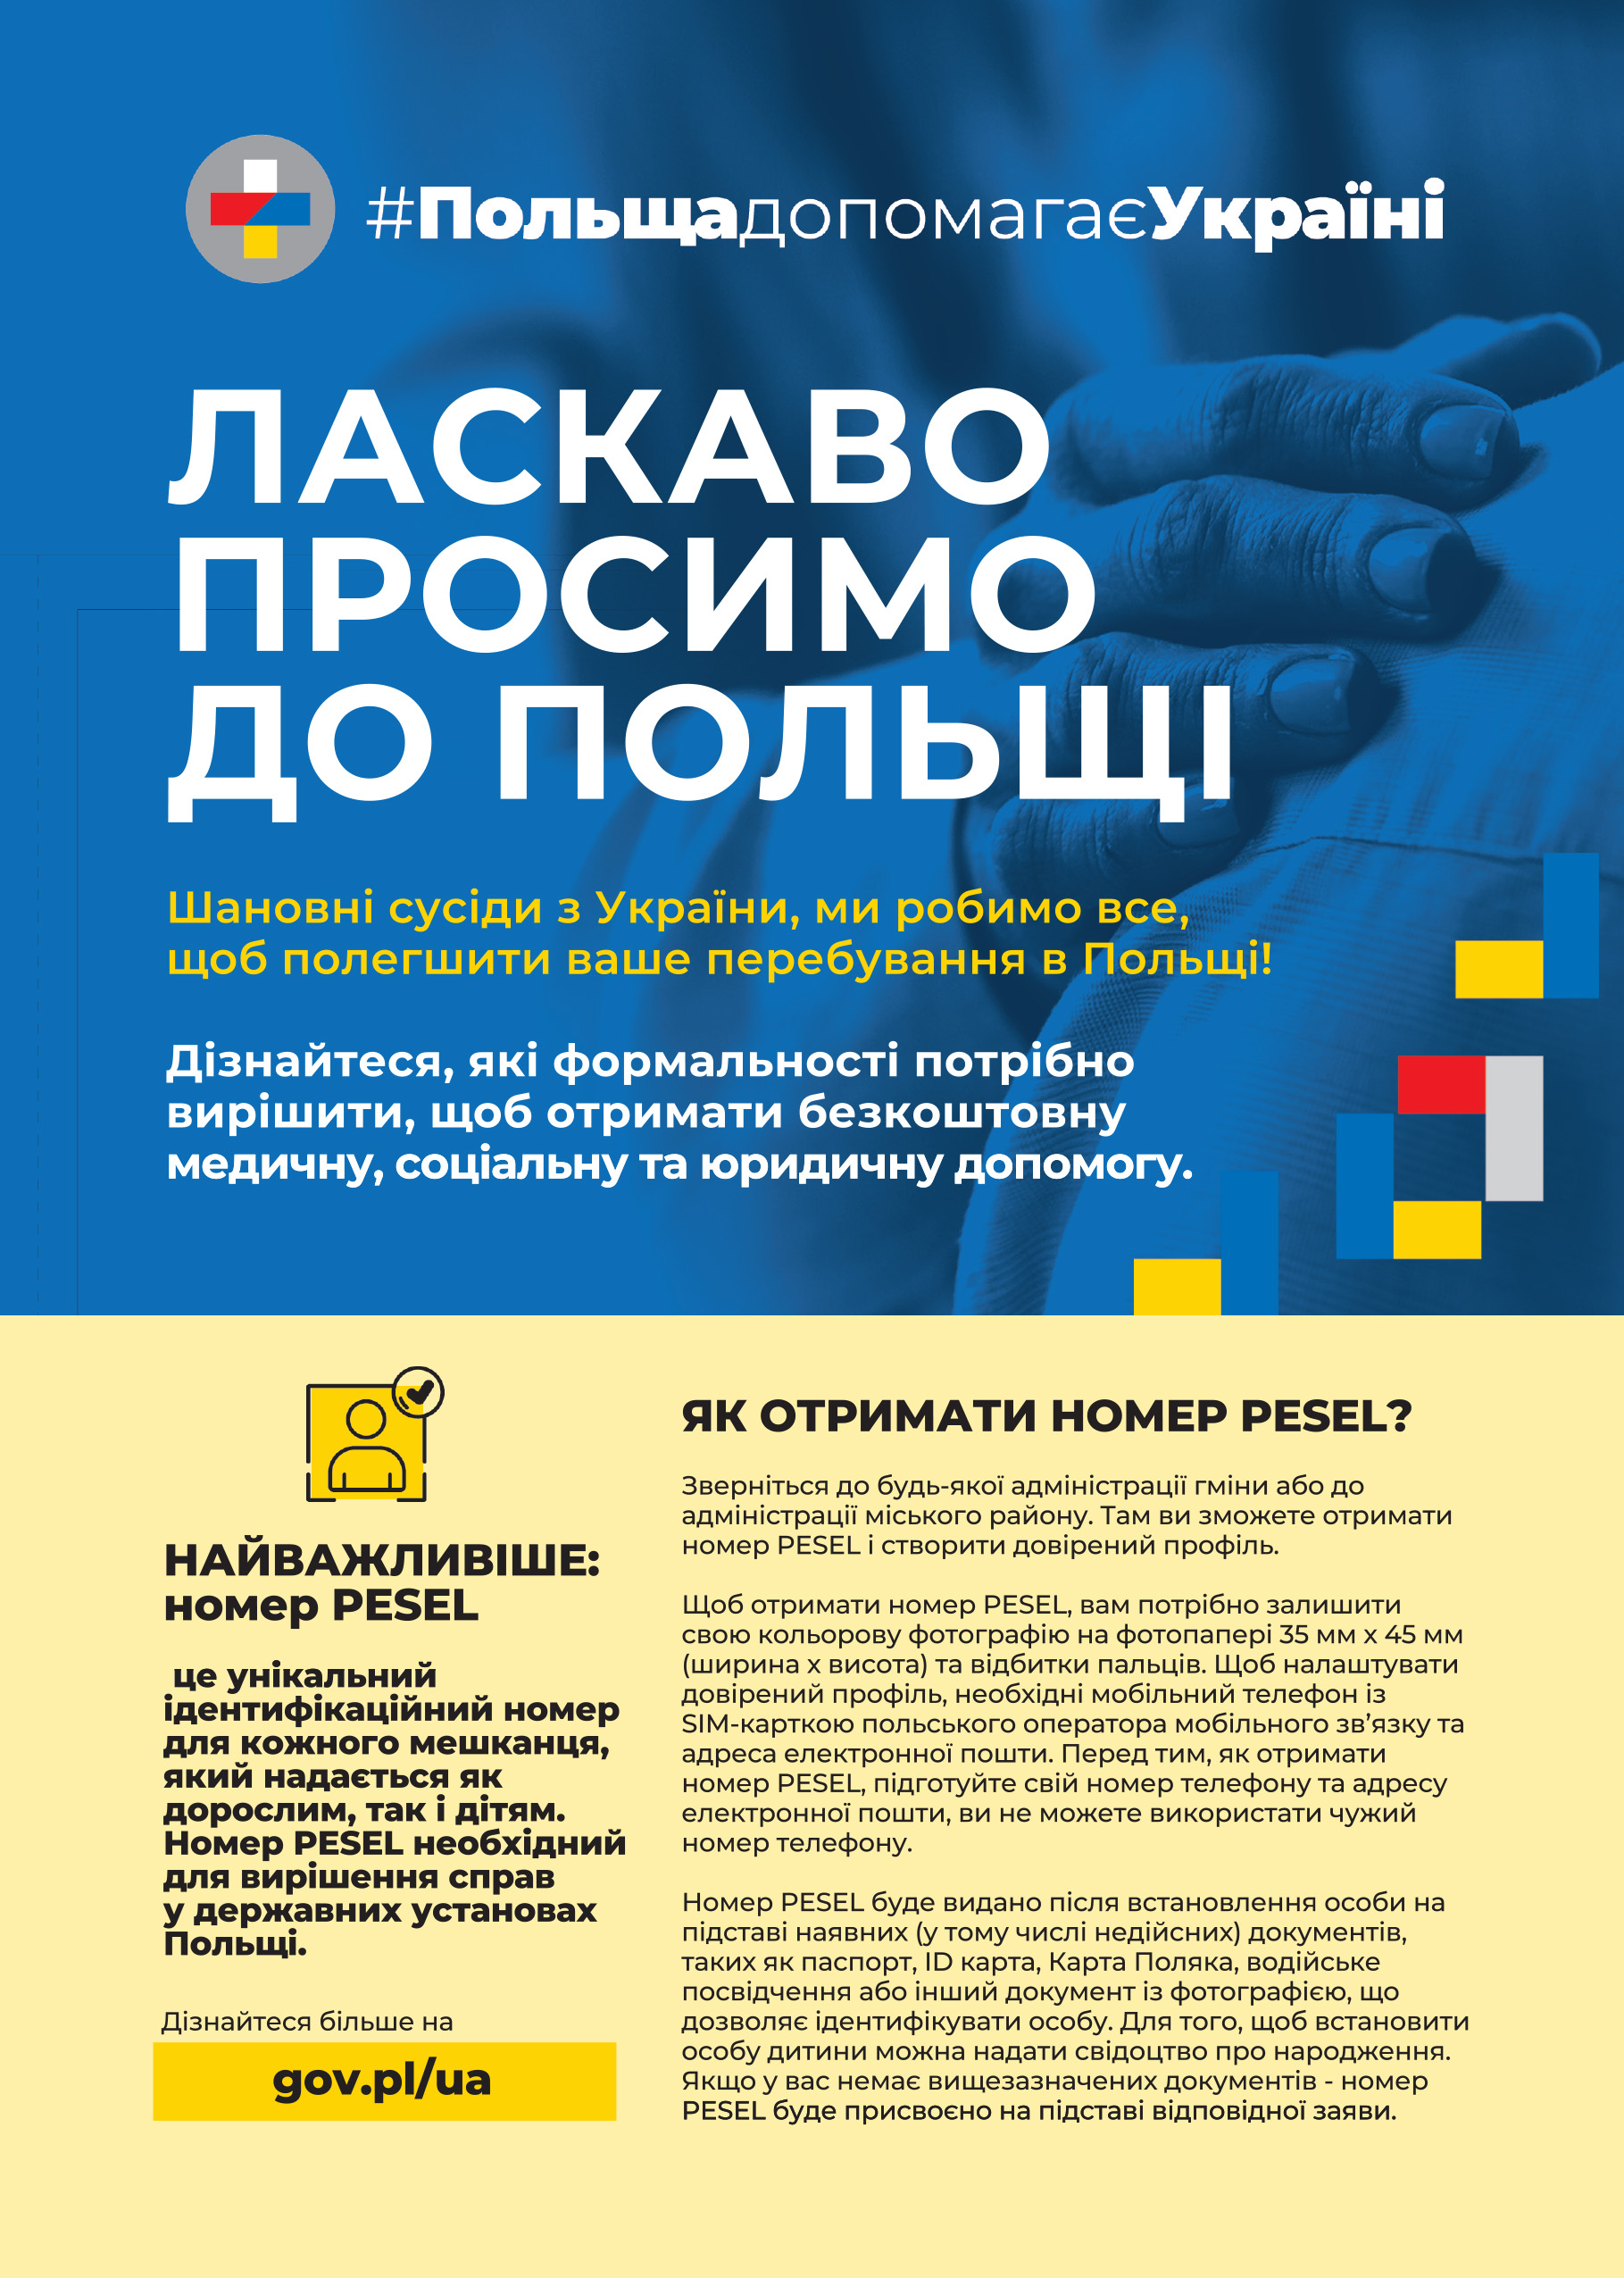 Leaflet on assigning a PESEL number for Ukrainian citizens fleeing the war in their country, front page.